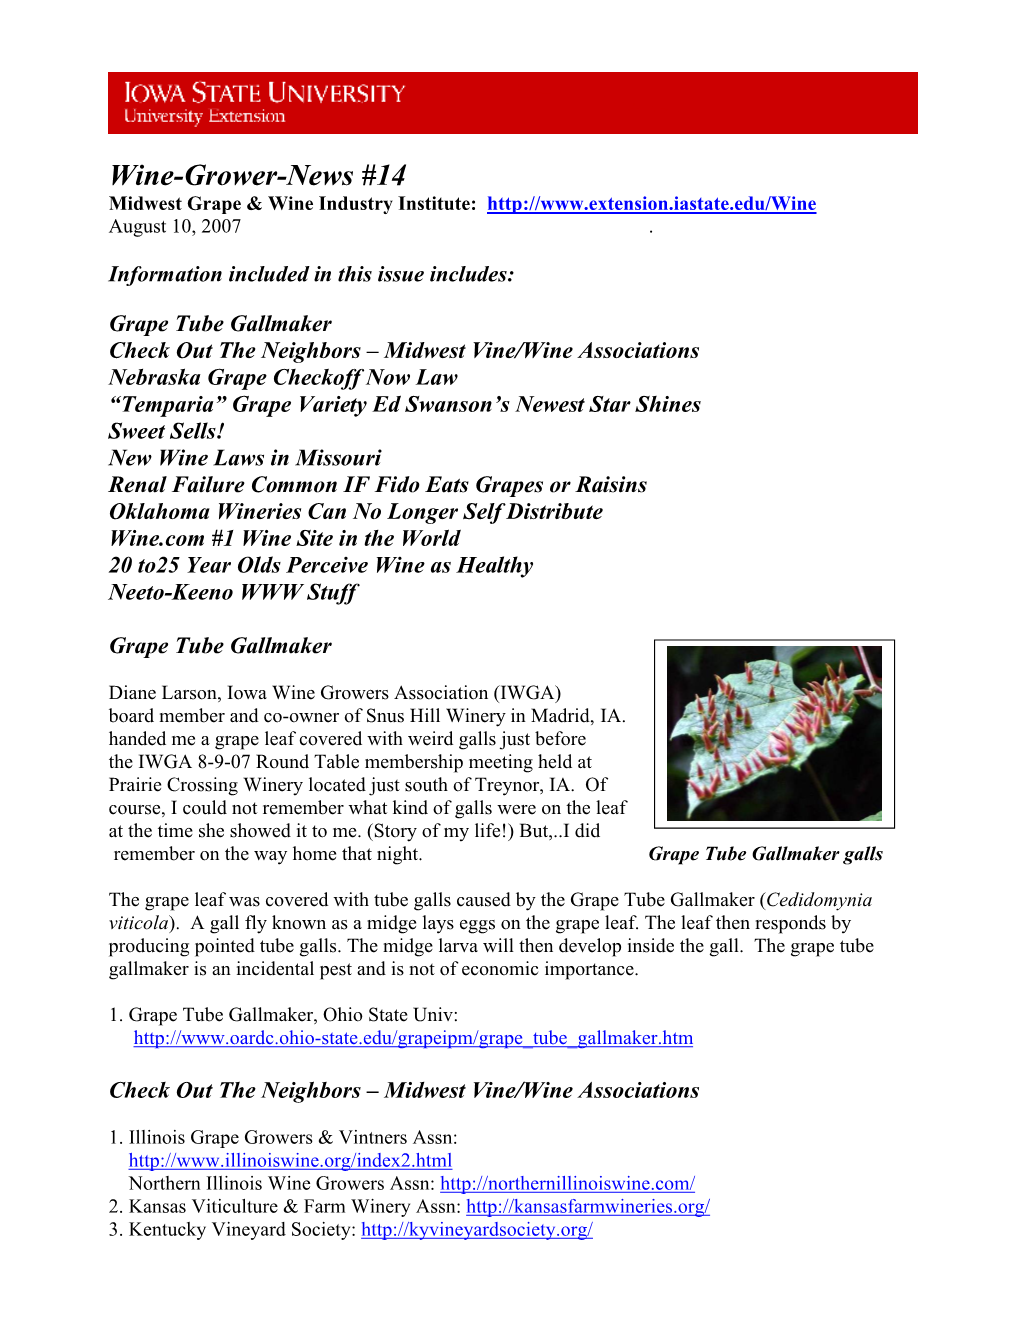 Wine-Grower-News #14 Midwest Grape & Wine Industry Institute: August 10, 2007